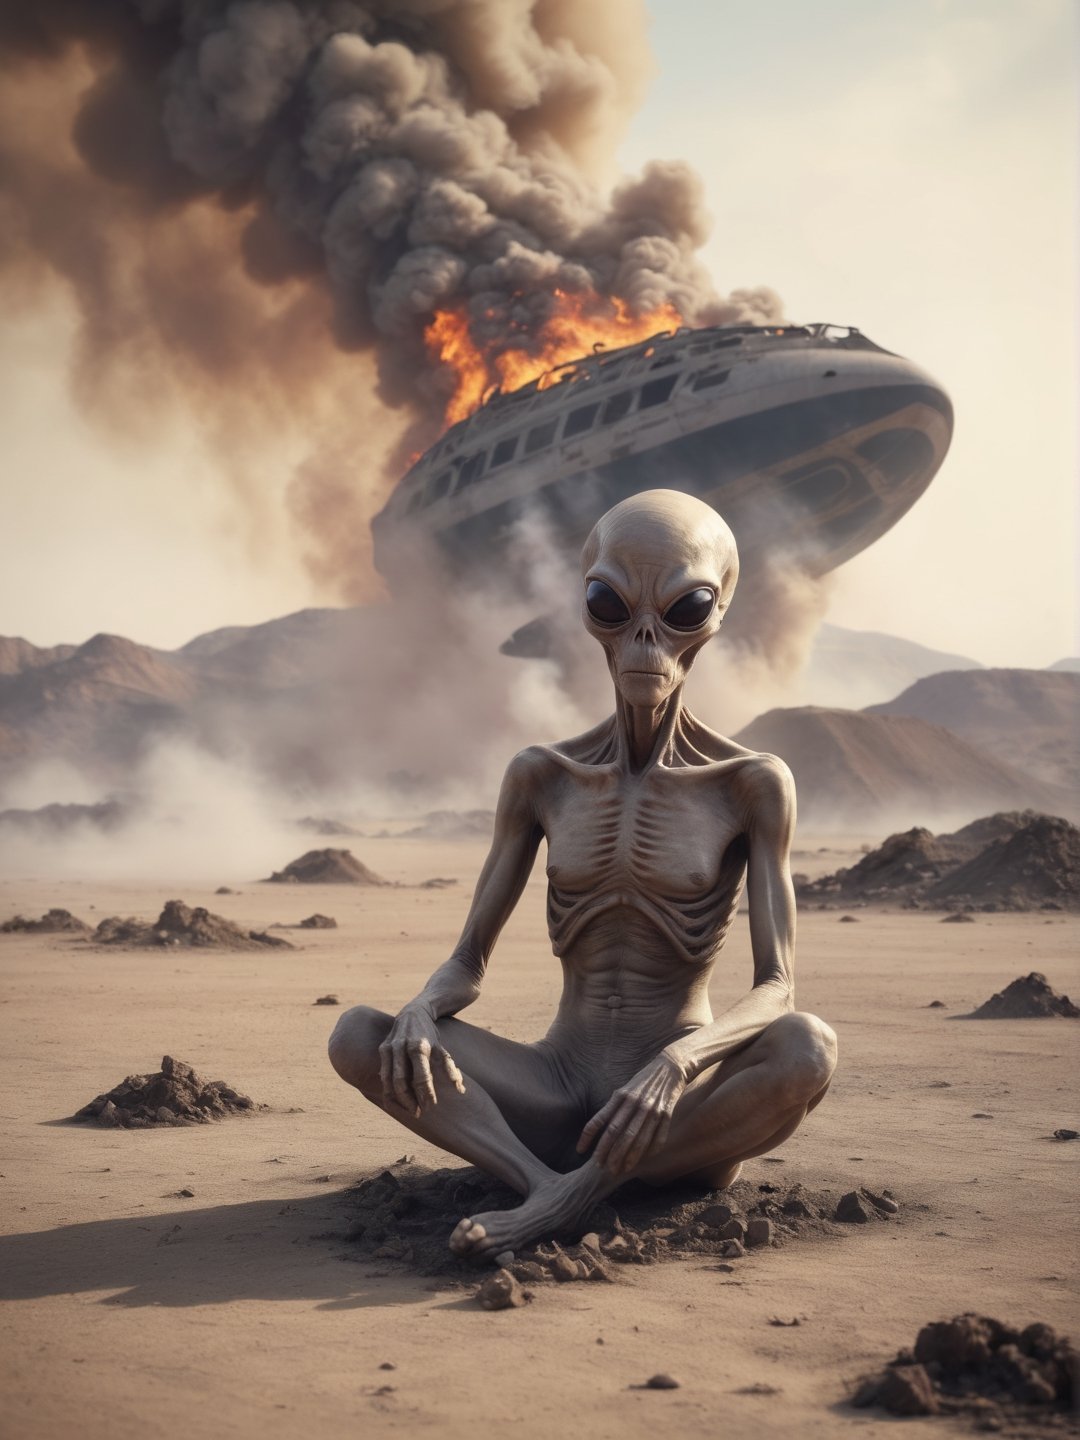 Sad alien in smokes, sitting on a ground, In the distance (An alien ship crashed to the ground, debris burning in the smoke), desert,,cinematic_warm_color, add_more_creative,alien